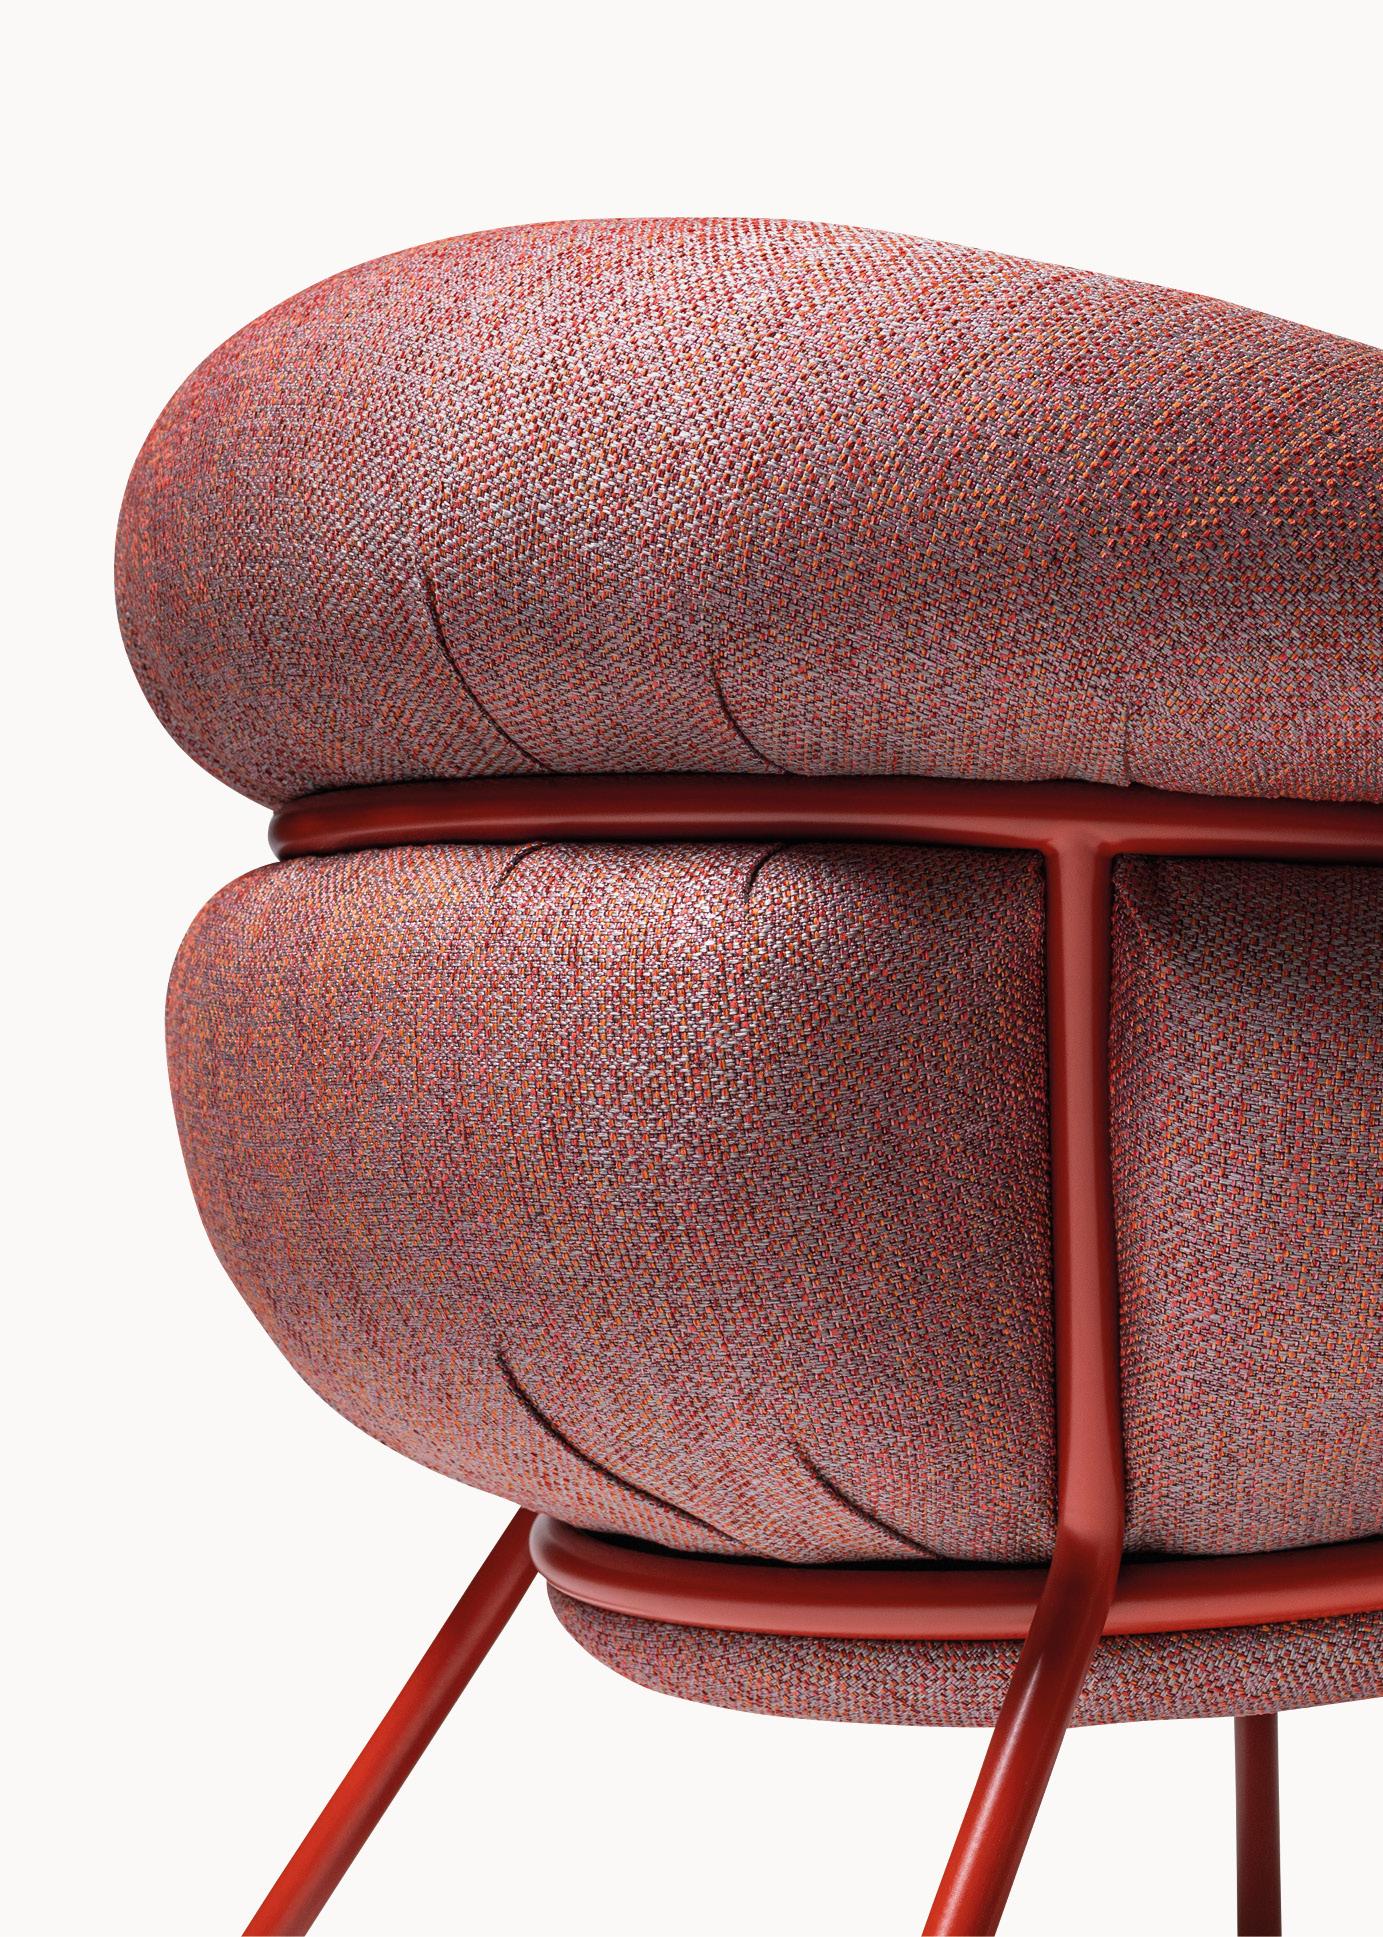 Grasso Armchair by Stephen Burks padded red upholstery with a red metal structur For Sale 5